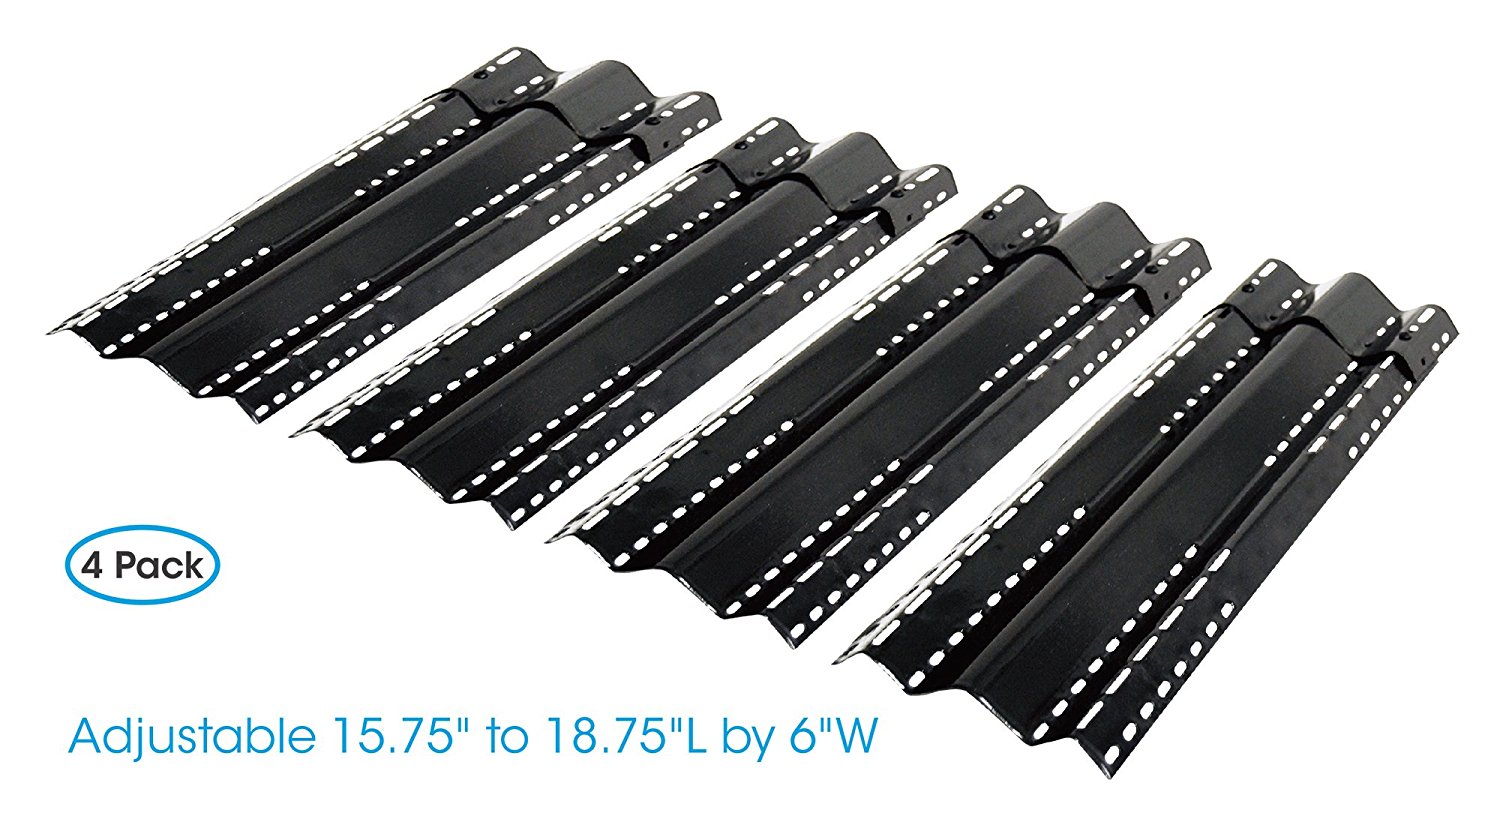 Details about   4X Porcelain Grill Heat Plate Heat Shield Plate Flavorizer Bar for BBQ Gas Grill 